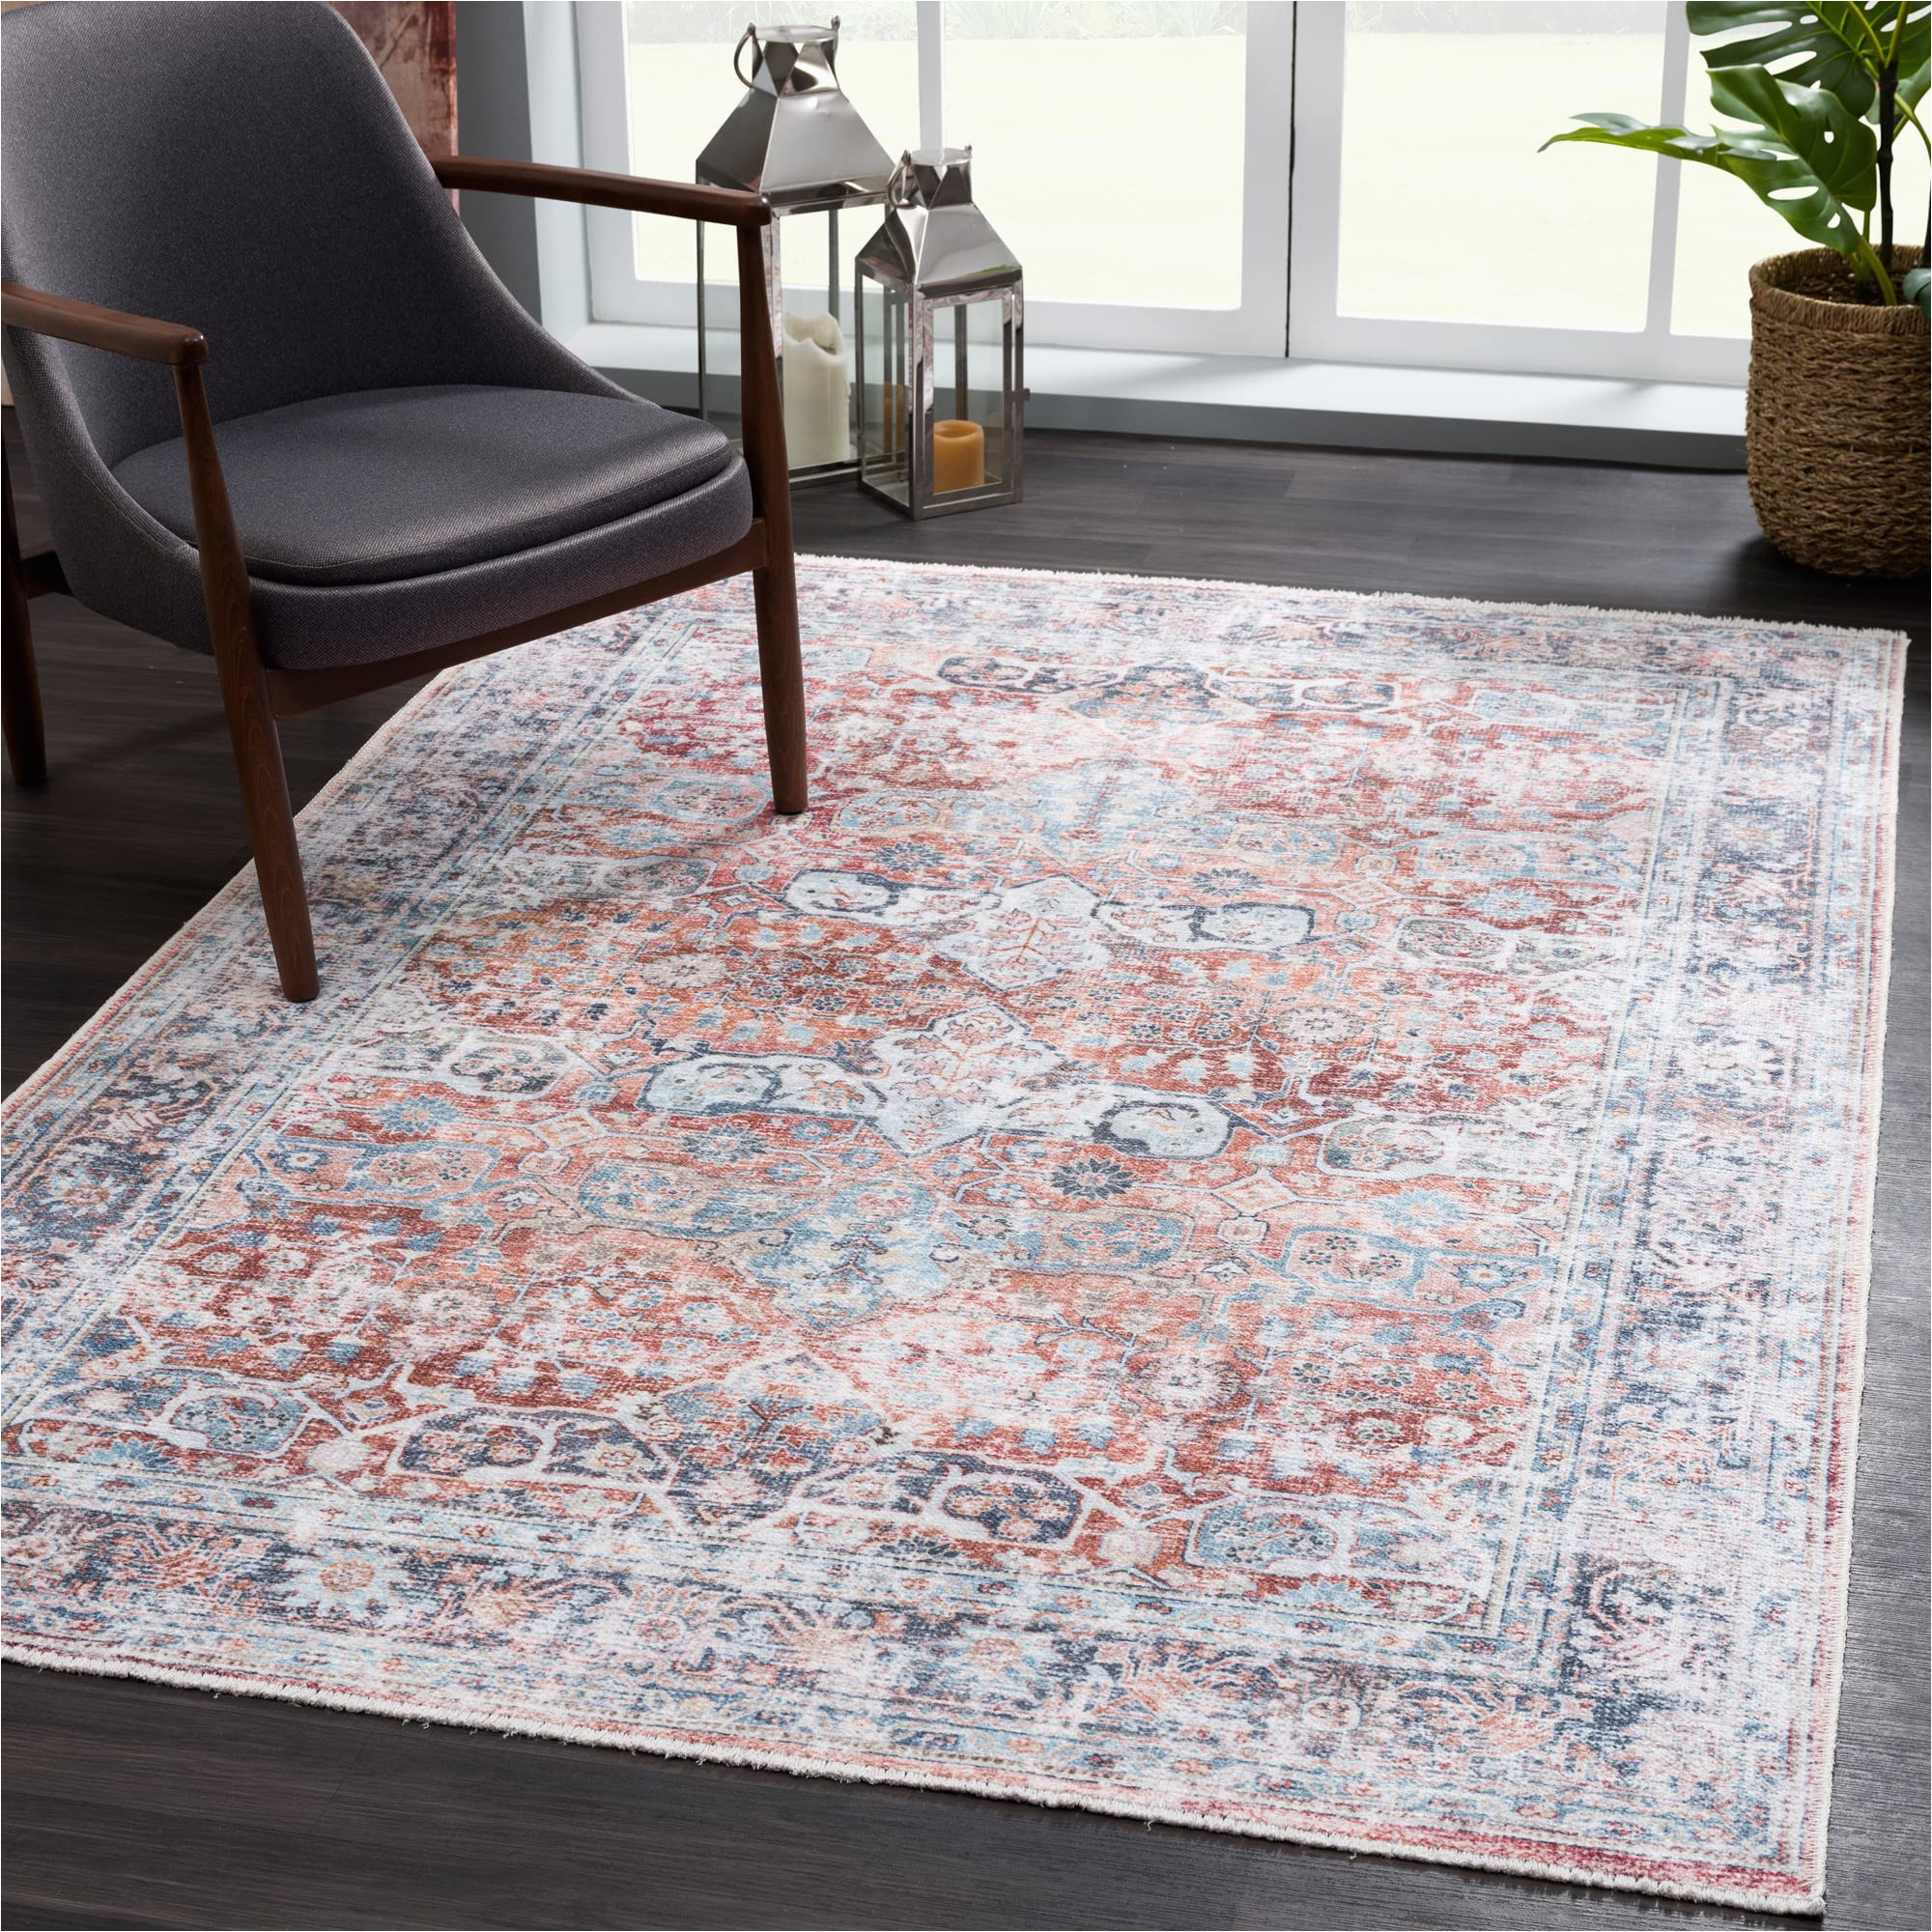 6×9 area Rugs for Dining Room Bloom Rugs Caria Washable Non-slip 6×9 Rug – Brick / Dark Blue area Rug for Living Room, Bedroom, Dining Room and Kitchen – Exact Size: 6′ X 9′